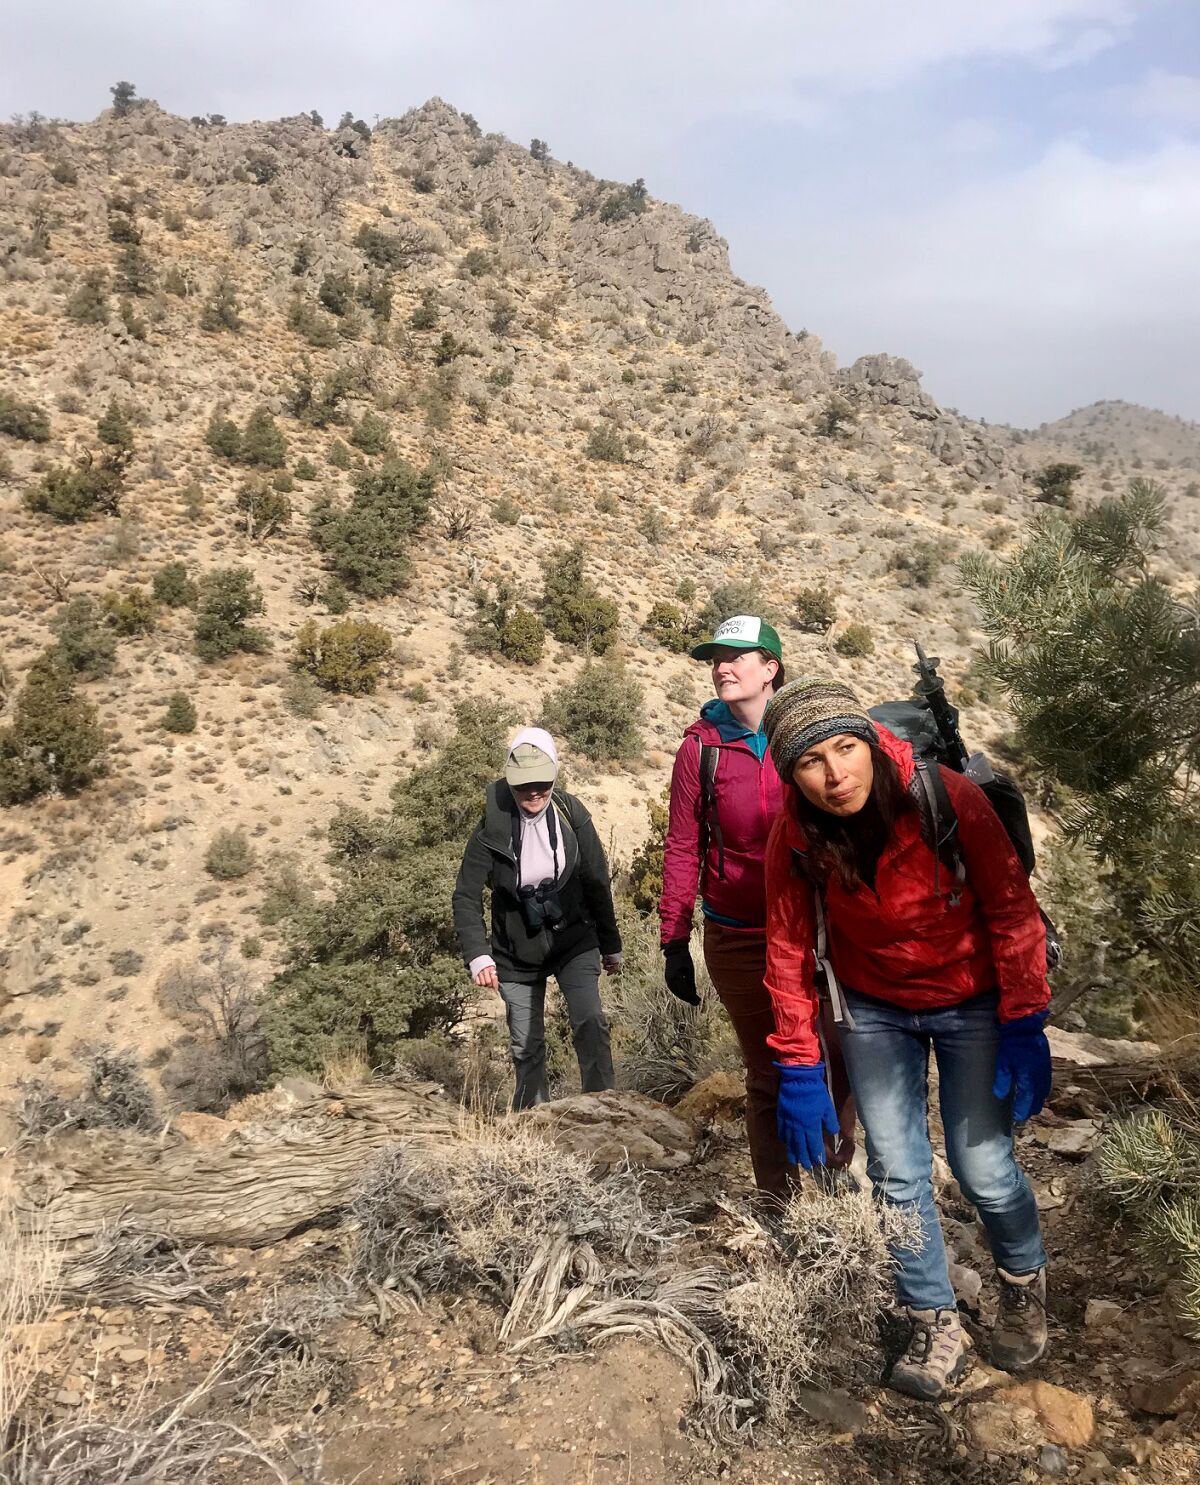 Three women hike in an area of the Conglomerate Mesa wilderness where the Inyo rock daisy is found.